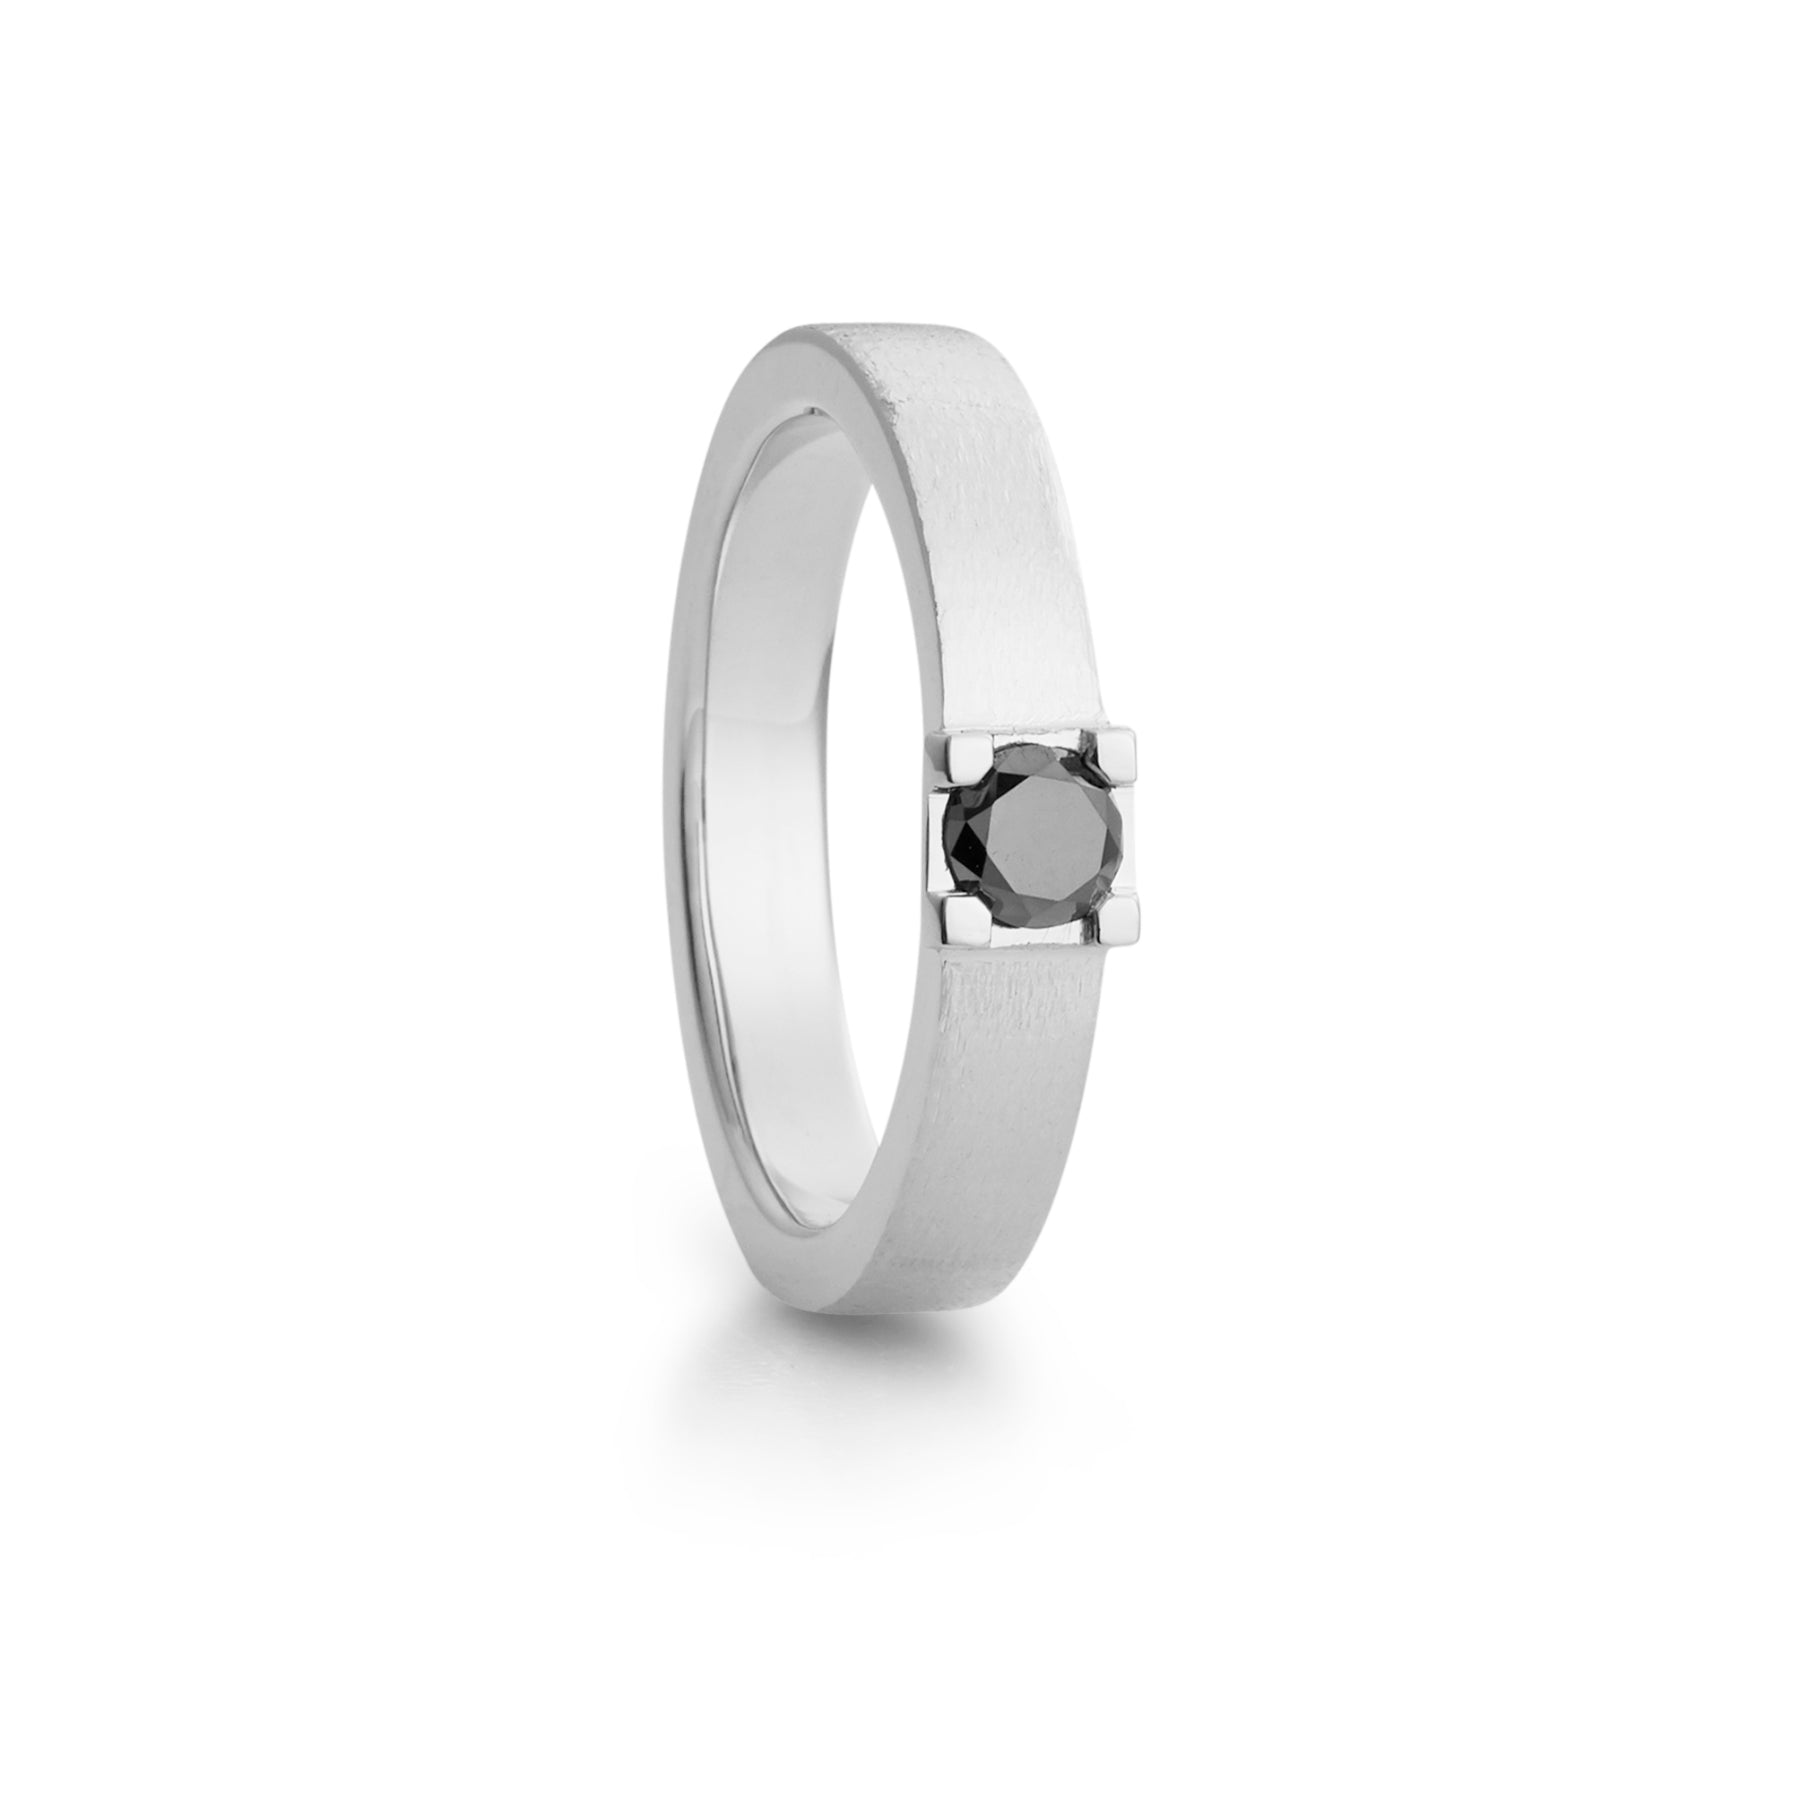 Magnificent white gold and black diamond ring, men's